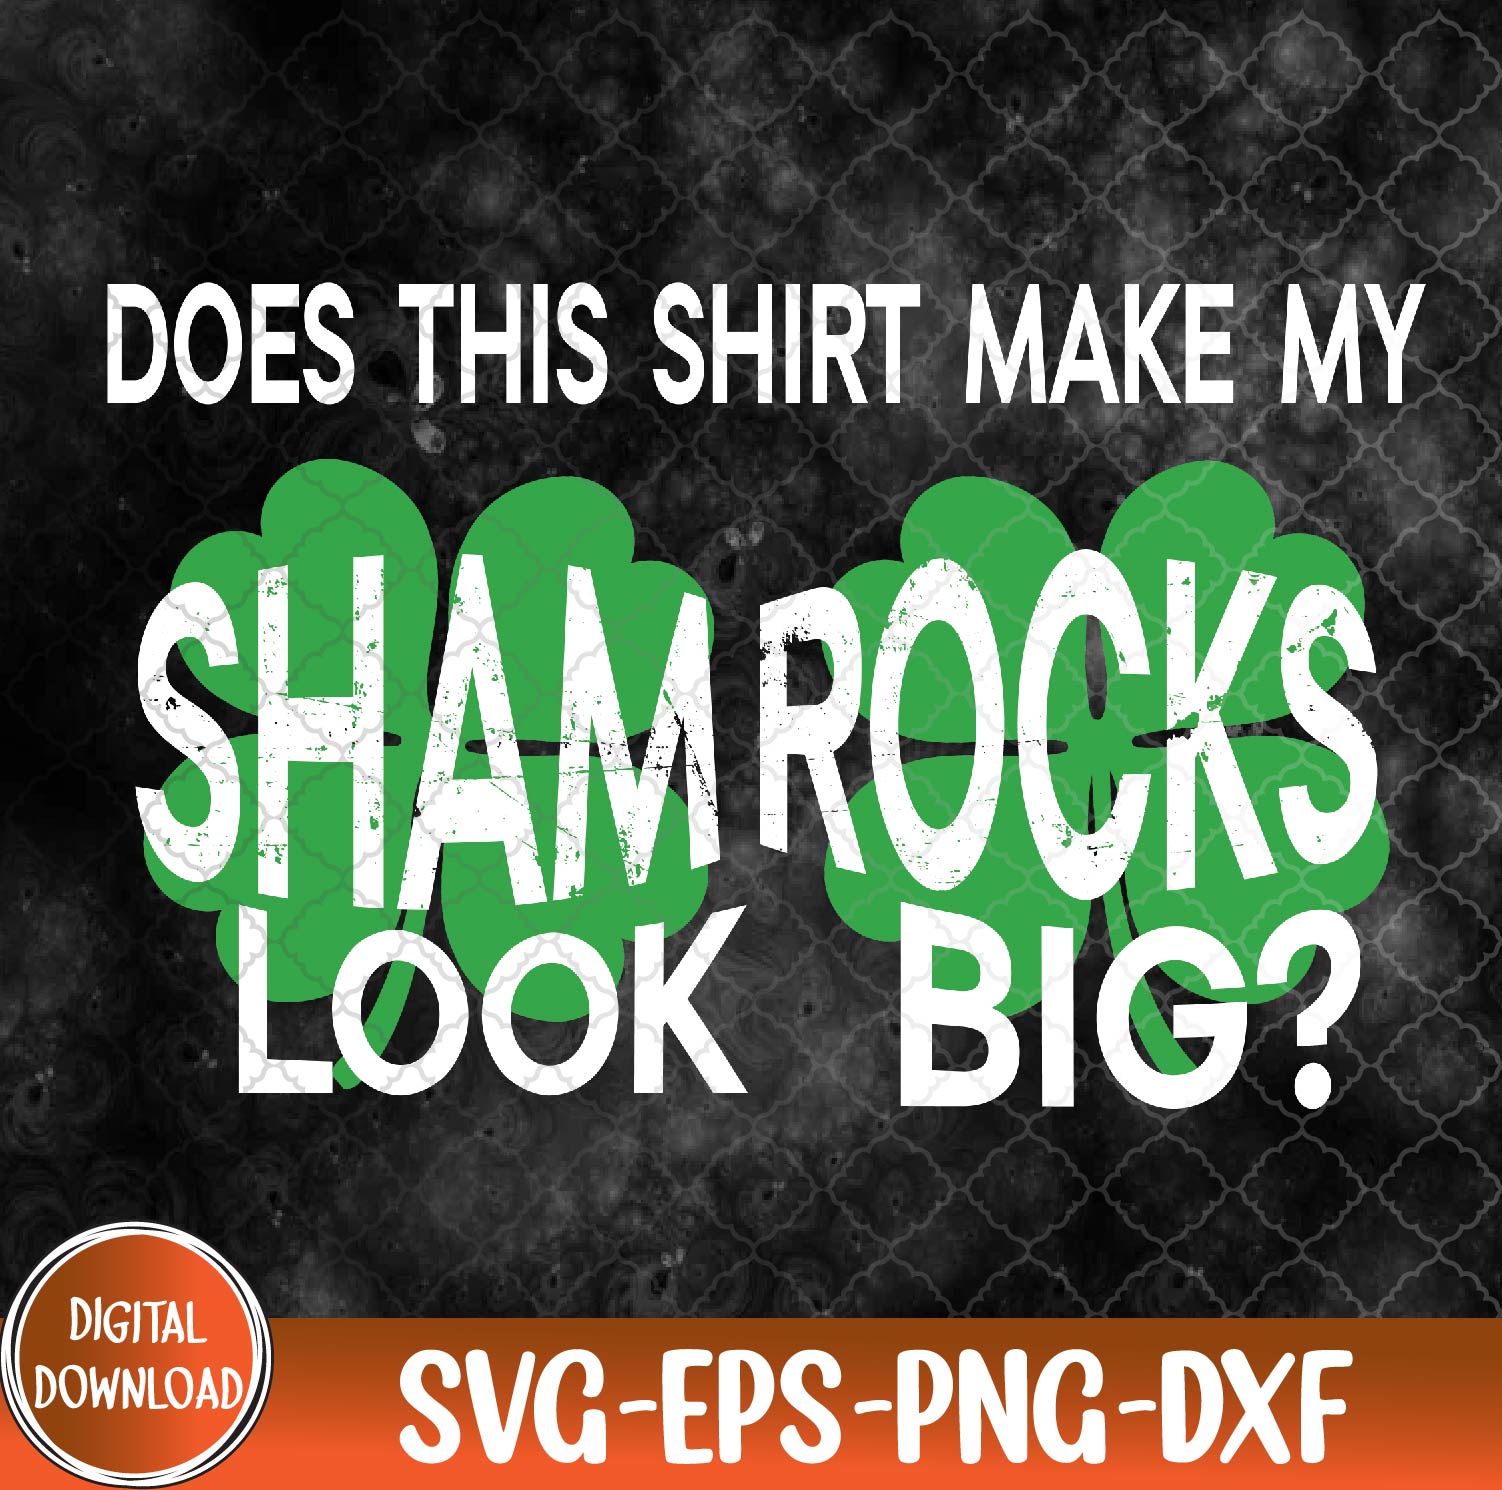 WTMNEW9file 09 242 Does This Make My Shamrock Look Big? St Patrick's Day Irish Svg, Eps, Png, Dxf